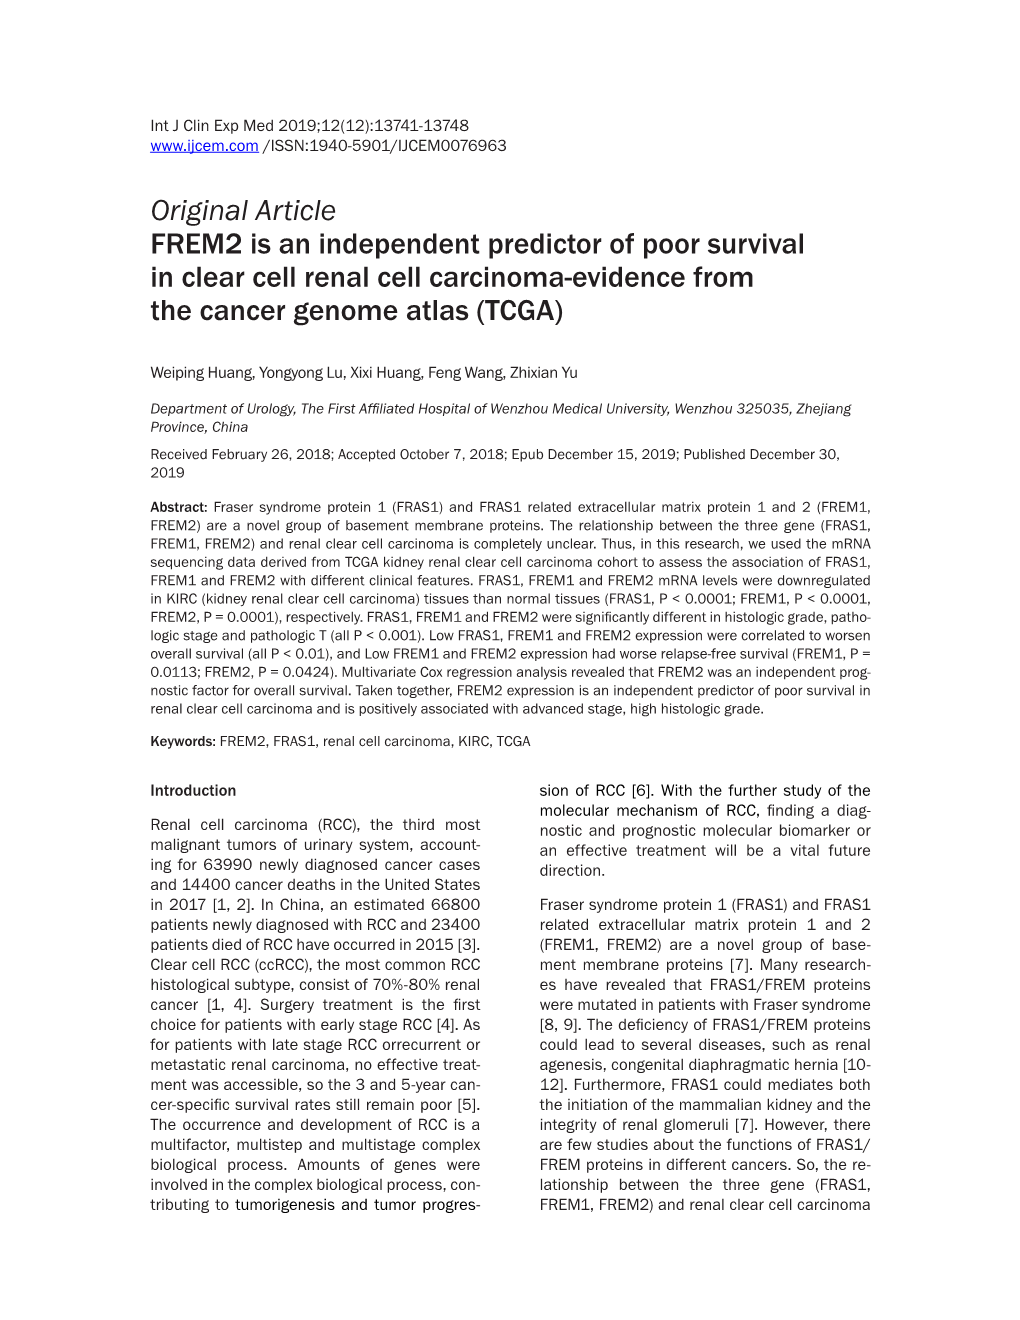 Original Article FREM2 Is an Independent Predictor of Poor Survival in Clear Cell Renal Cell Carcinoma-Evidence from the Cancer Genome Atlas (TCGA)